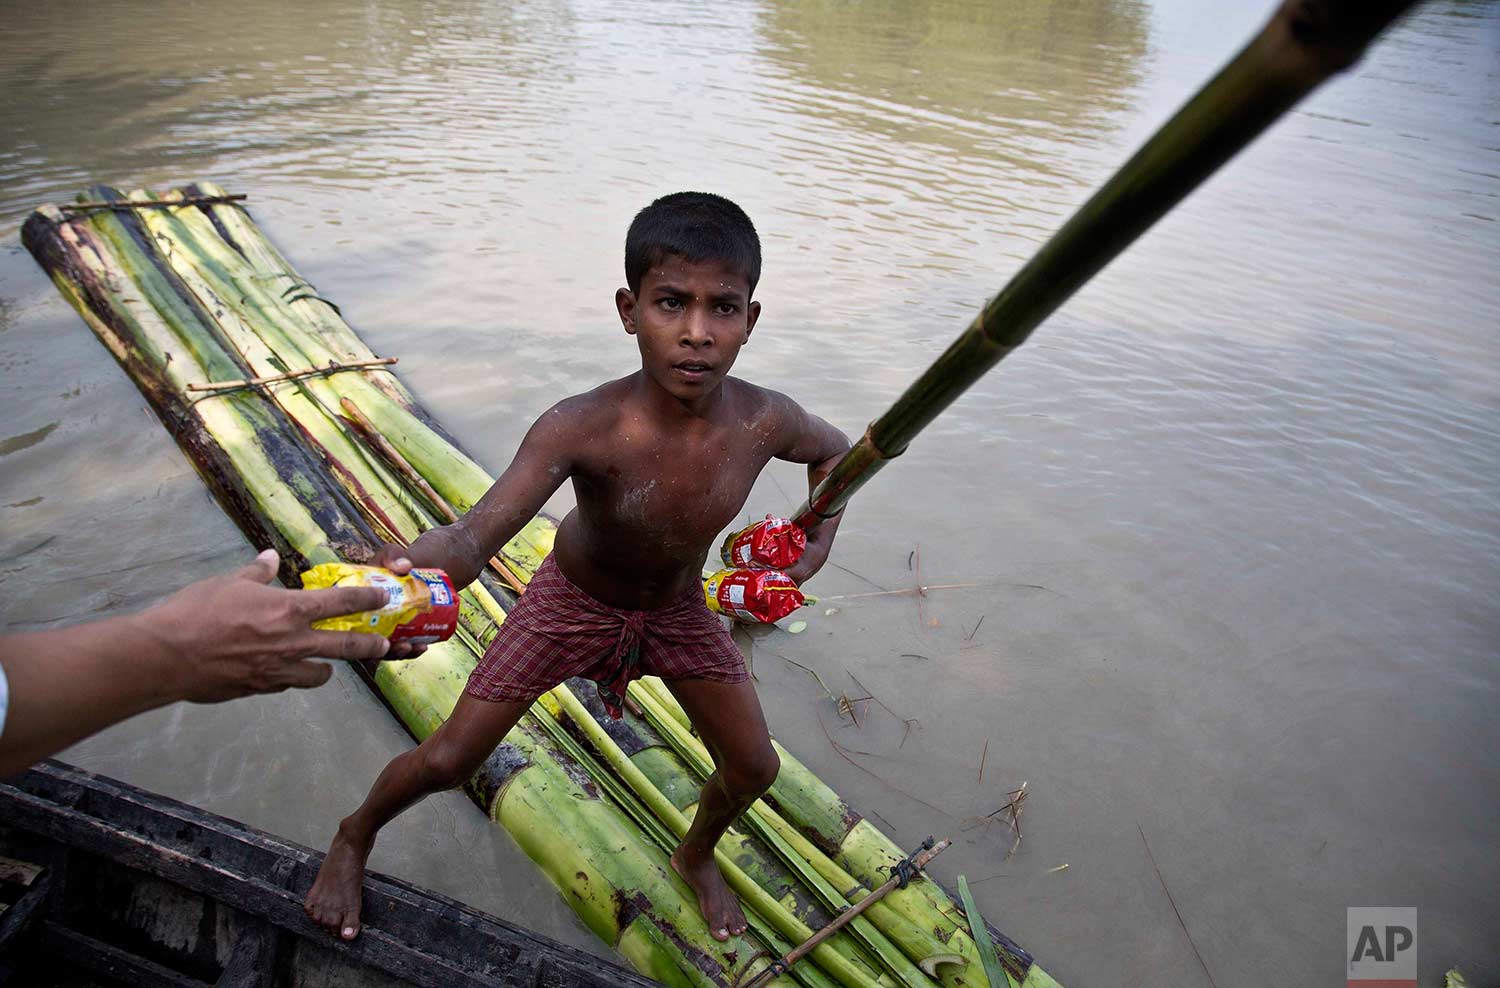  A flood affected boy on a makeshift banana raft collects biscuit packets distributed by a government official from a boat in Pokoria village, east of Gauhati, north eastern Assam state, India, Monday, Aug. 14, 2017. (AP Photo/Anupam Nath) 